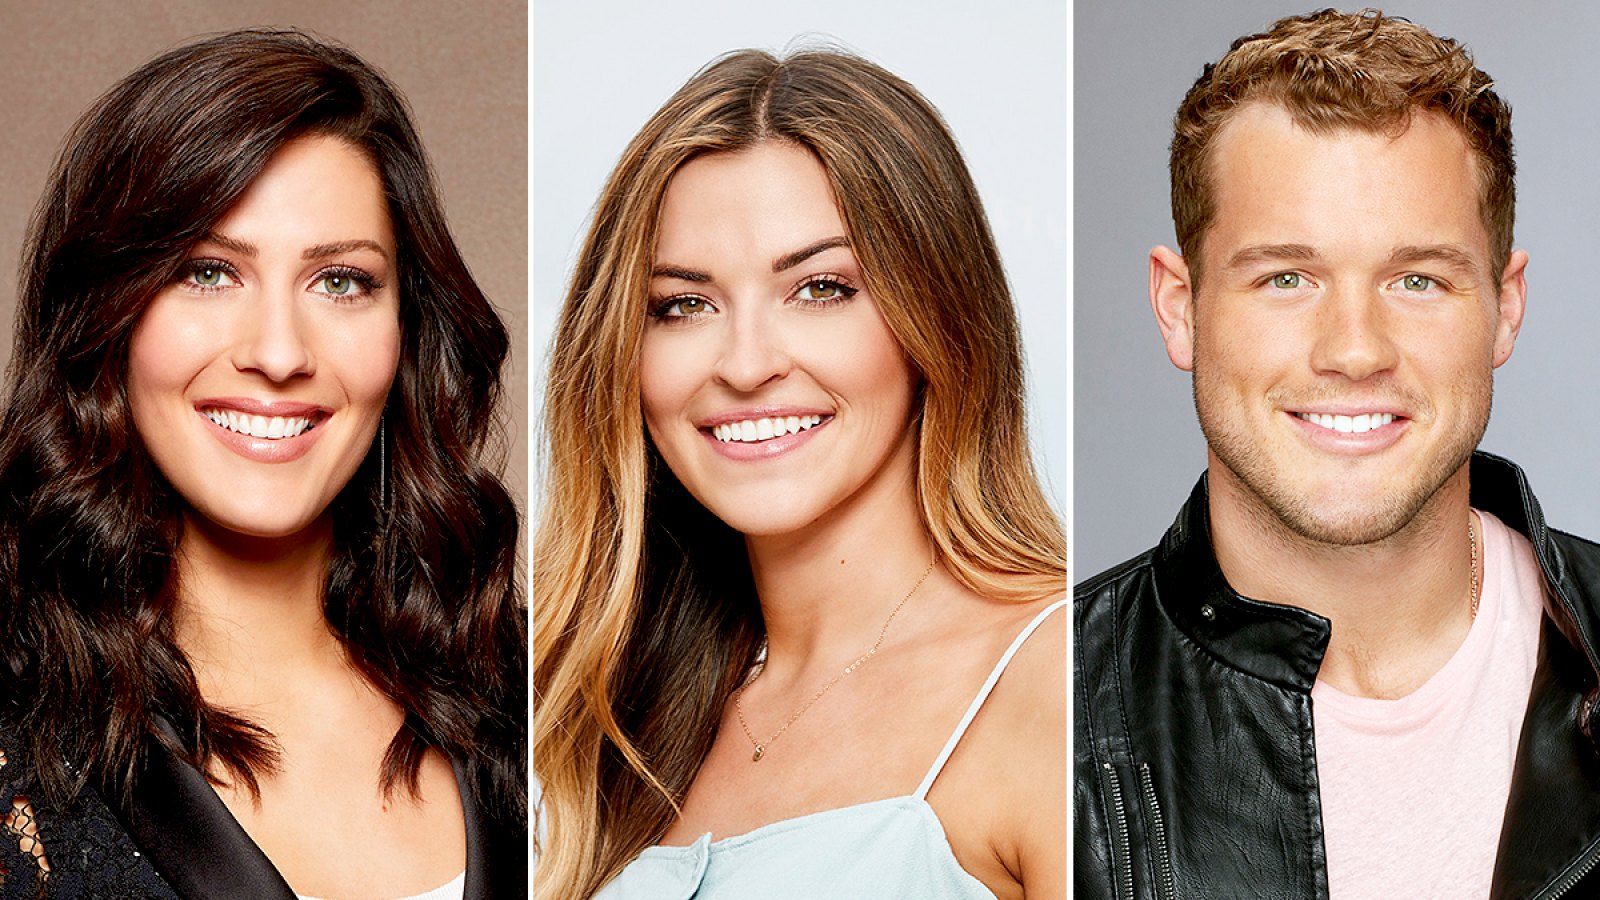 Becca Kufrin, Tia Booth, and Colton Underwood